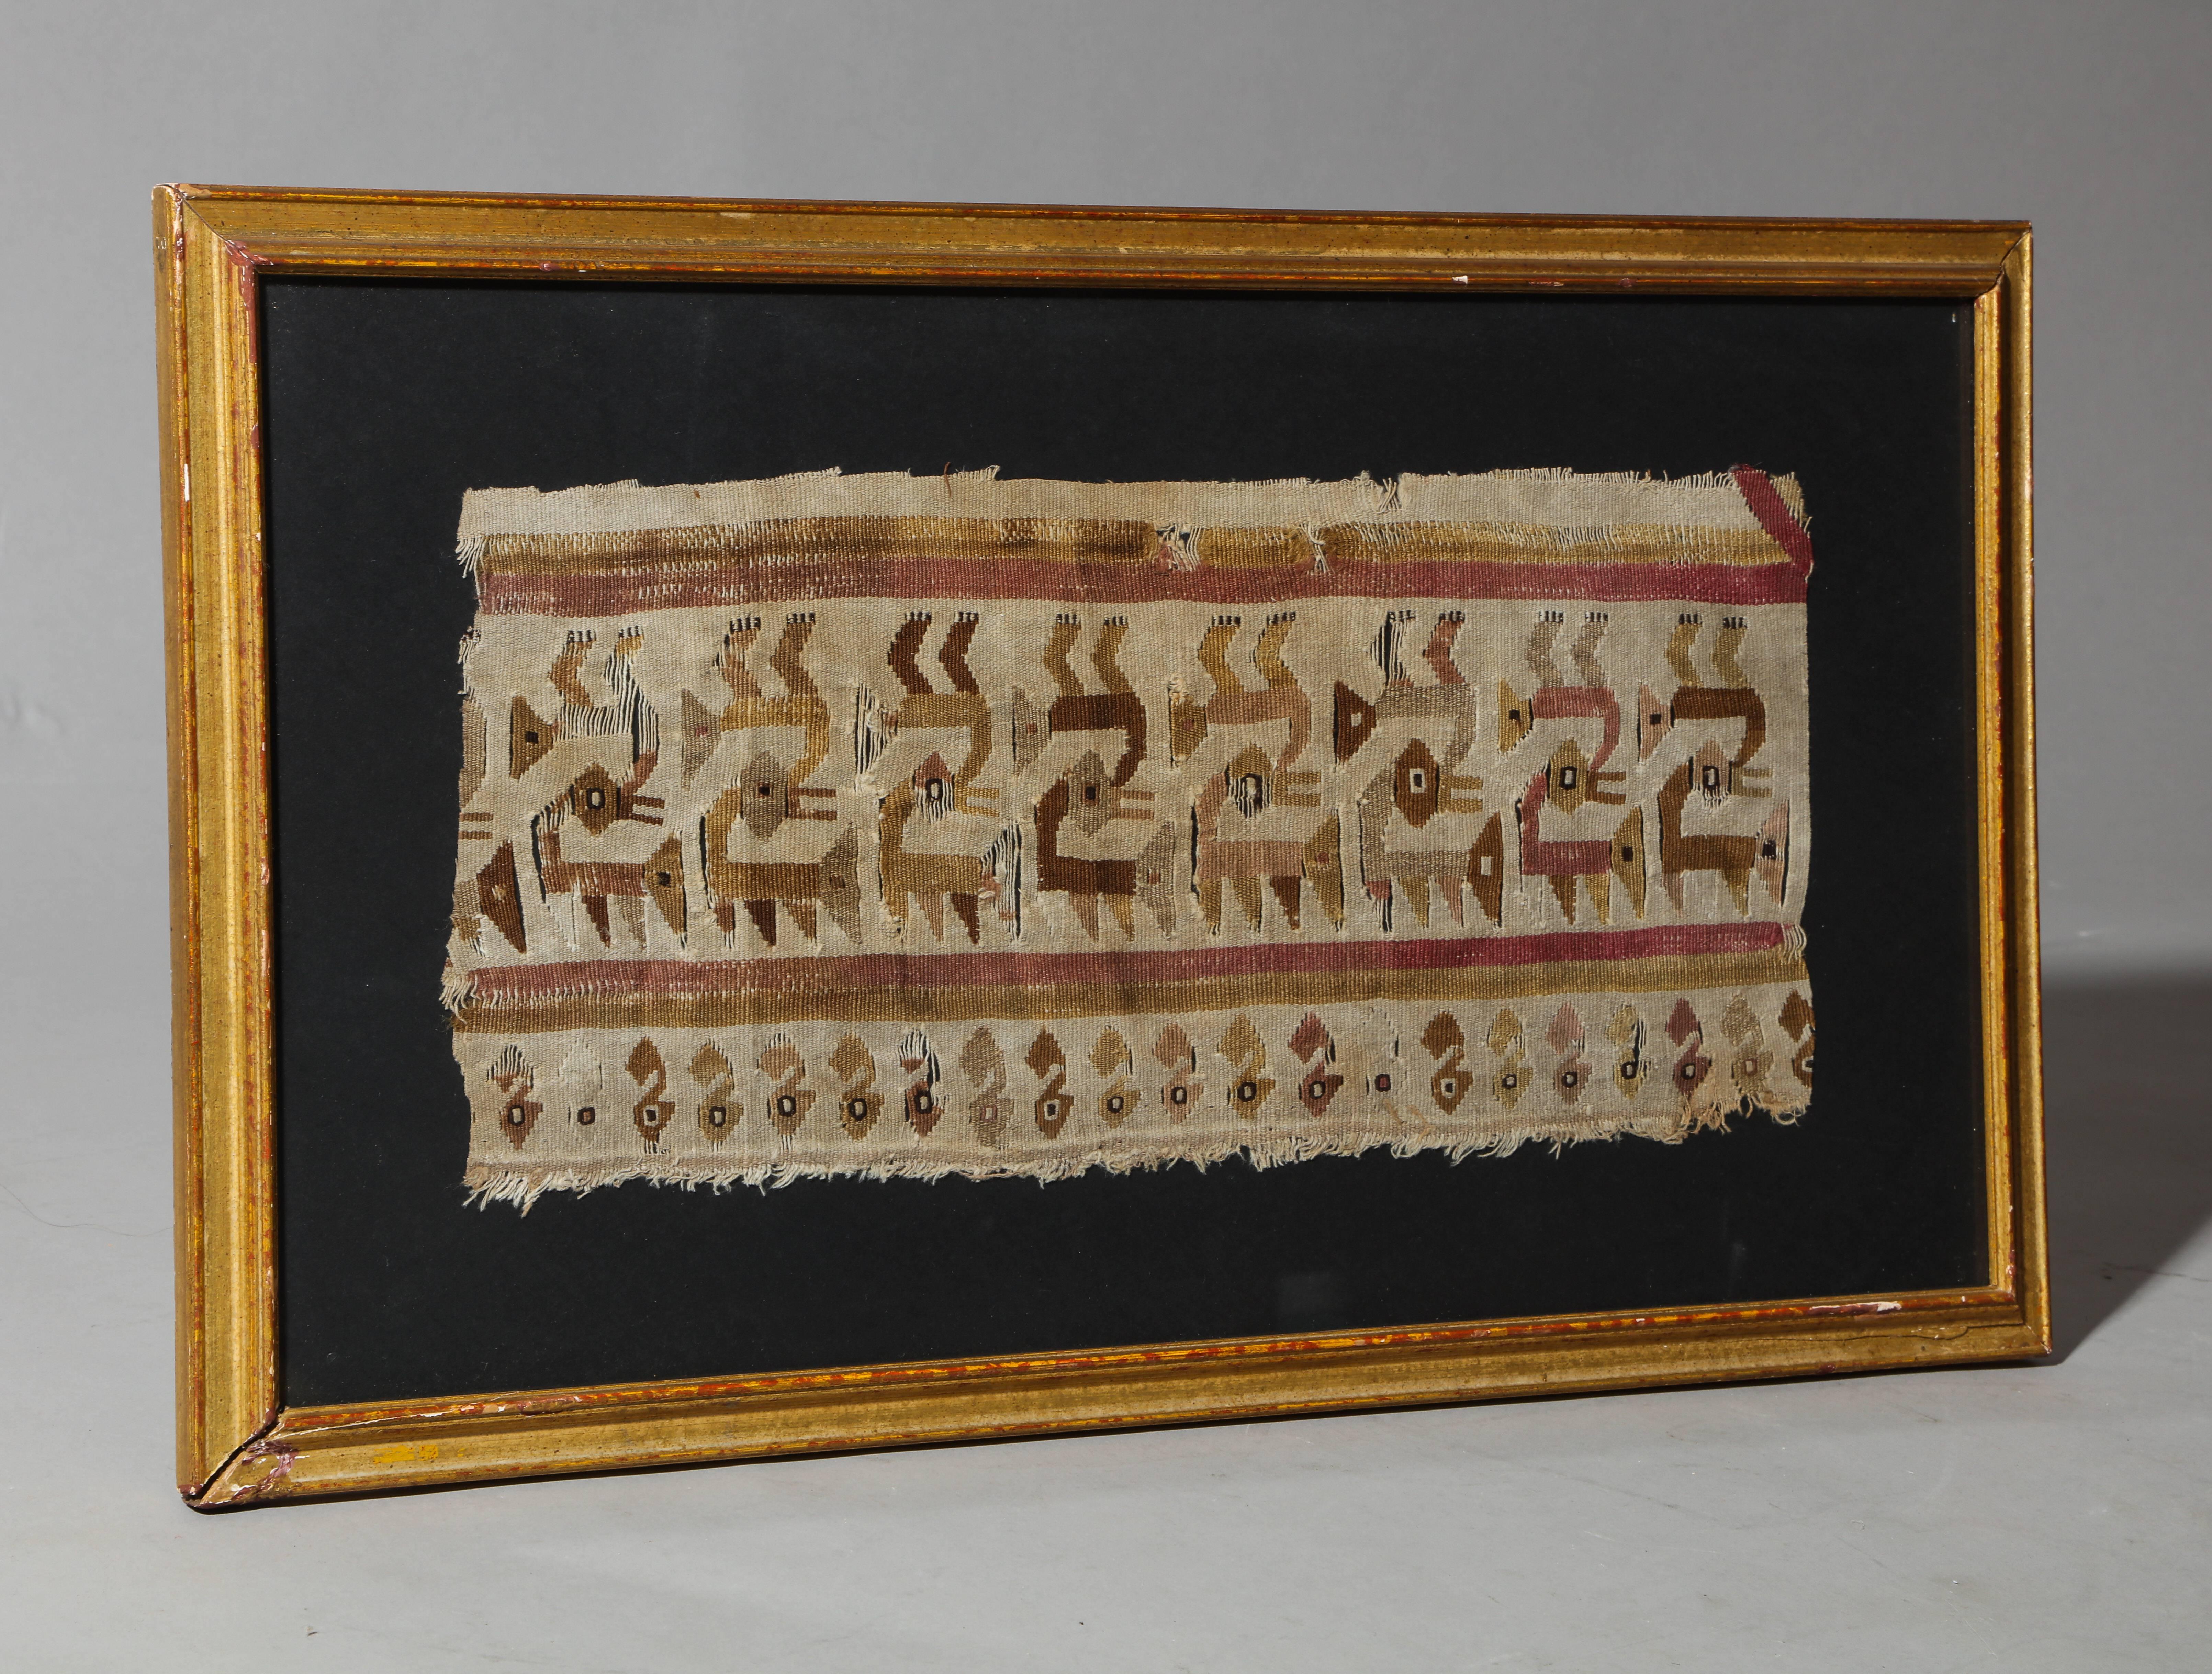 A Pre-Columbian textile fragment with design, visible in two directions.
Peruvian.
Size without frame: 7